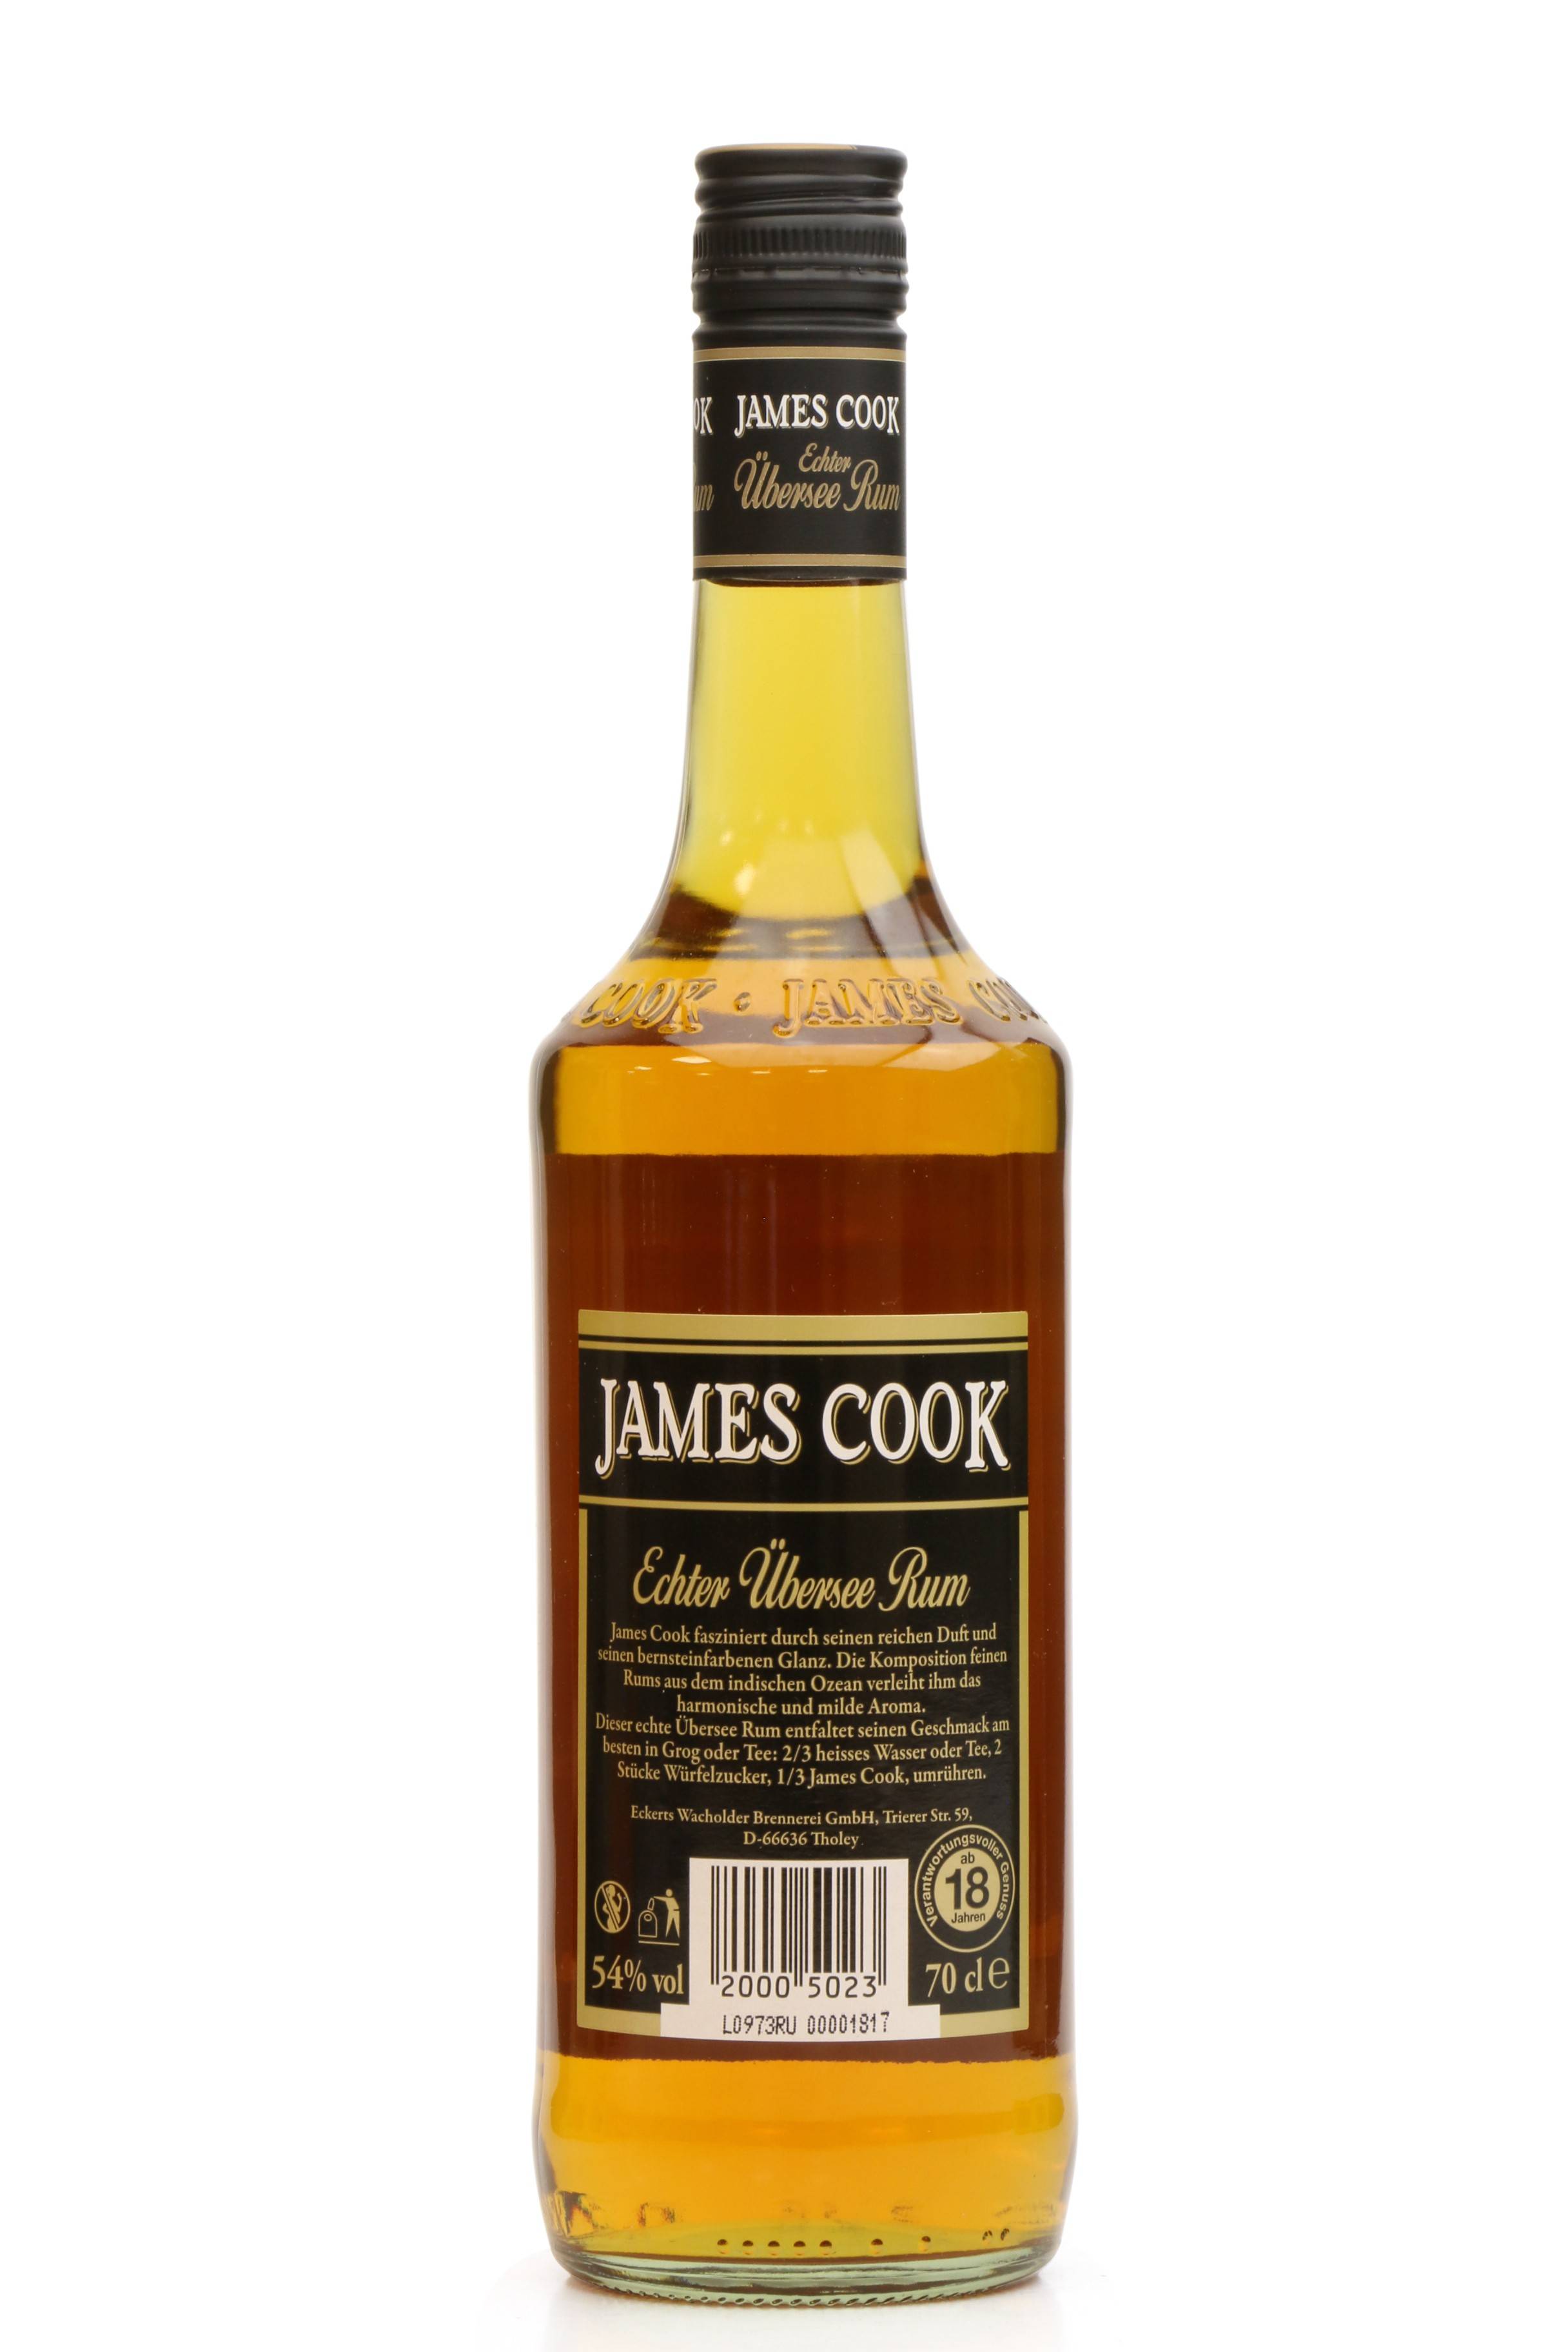 James Cook Echter Ubersee Rum (54%) Auctions - Whisky Just